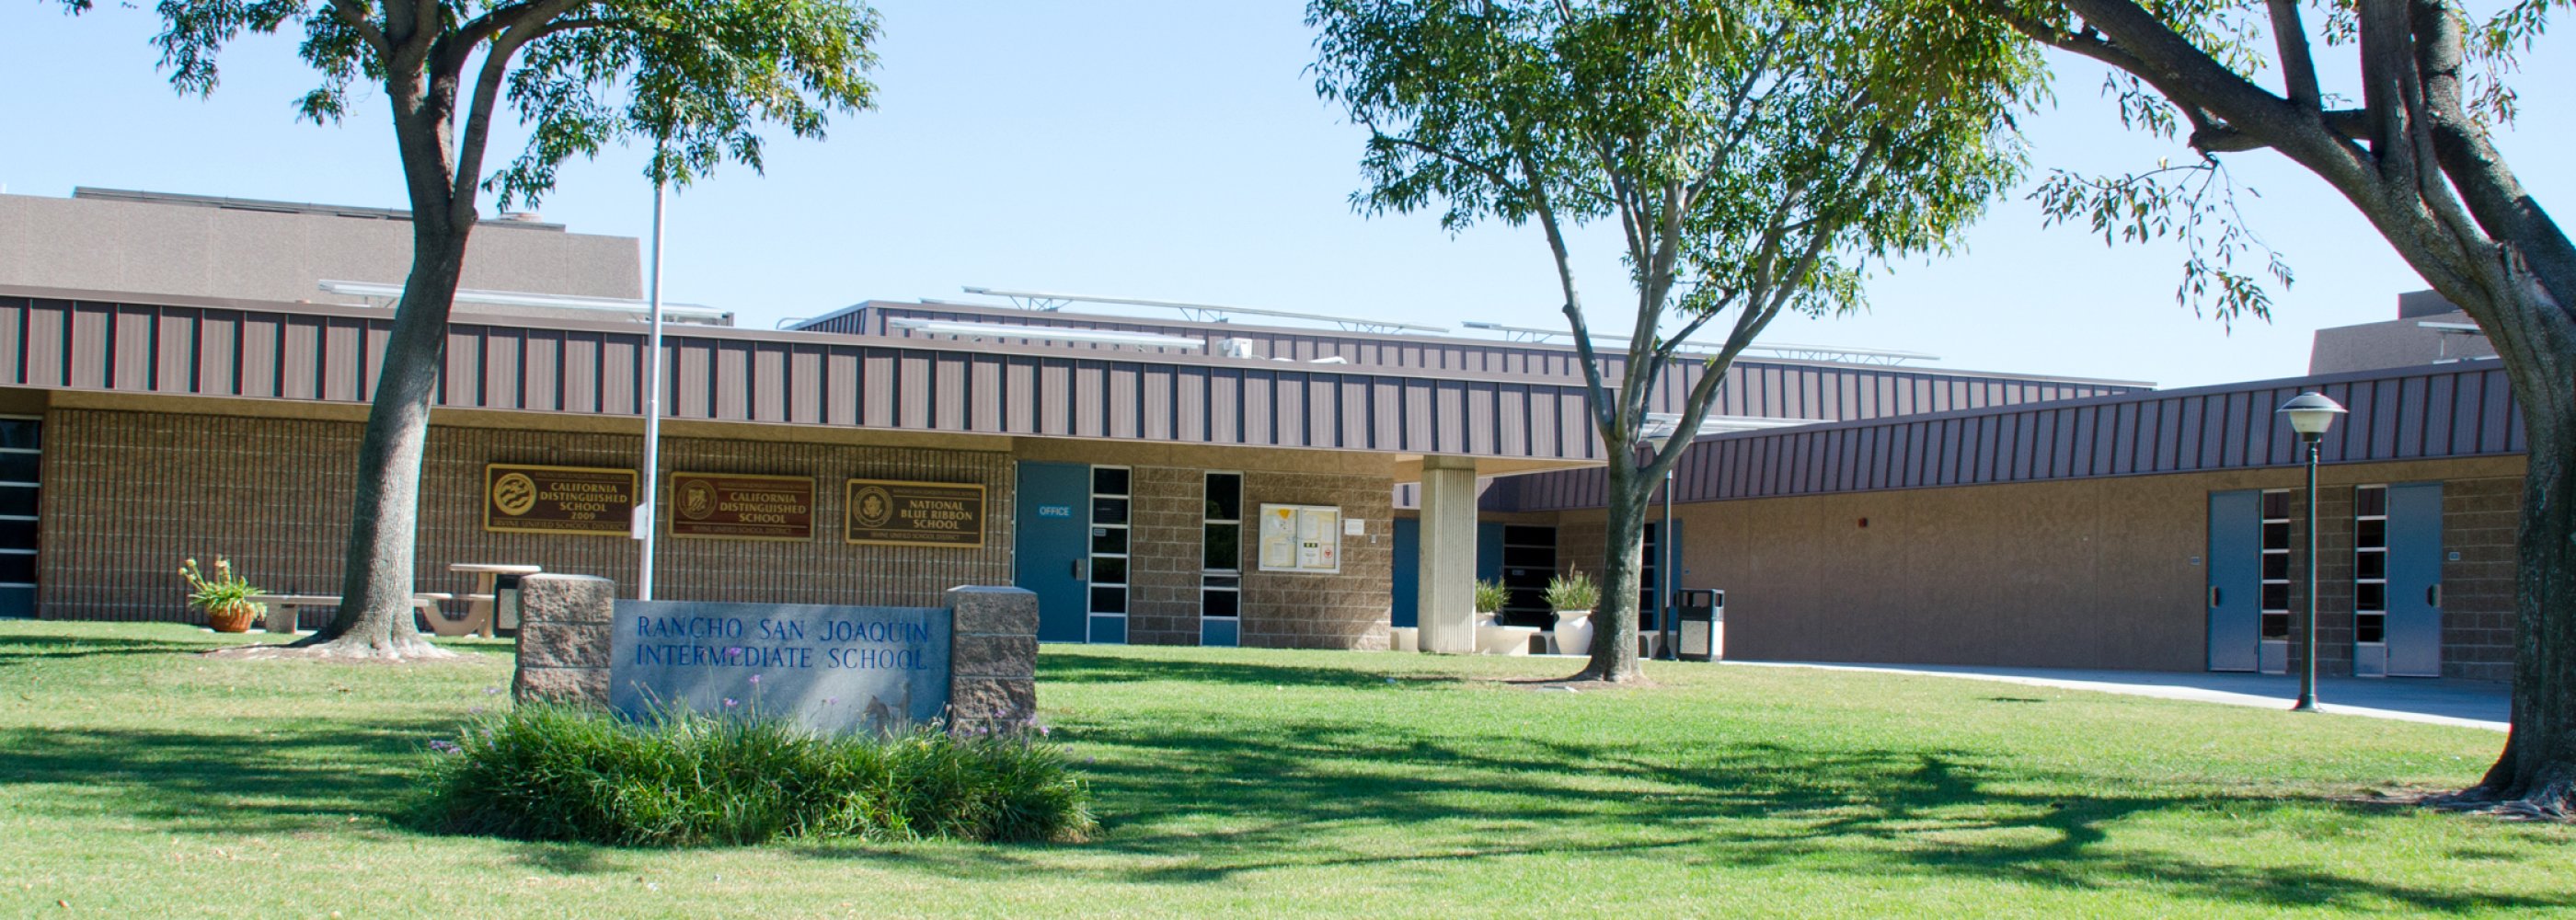 front of Ranch middle school